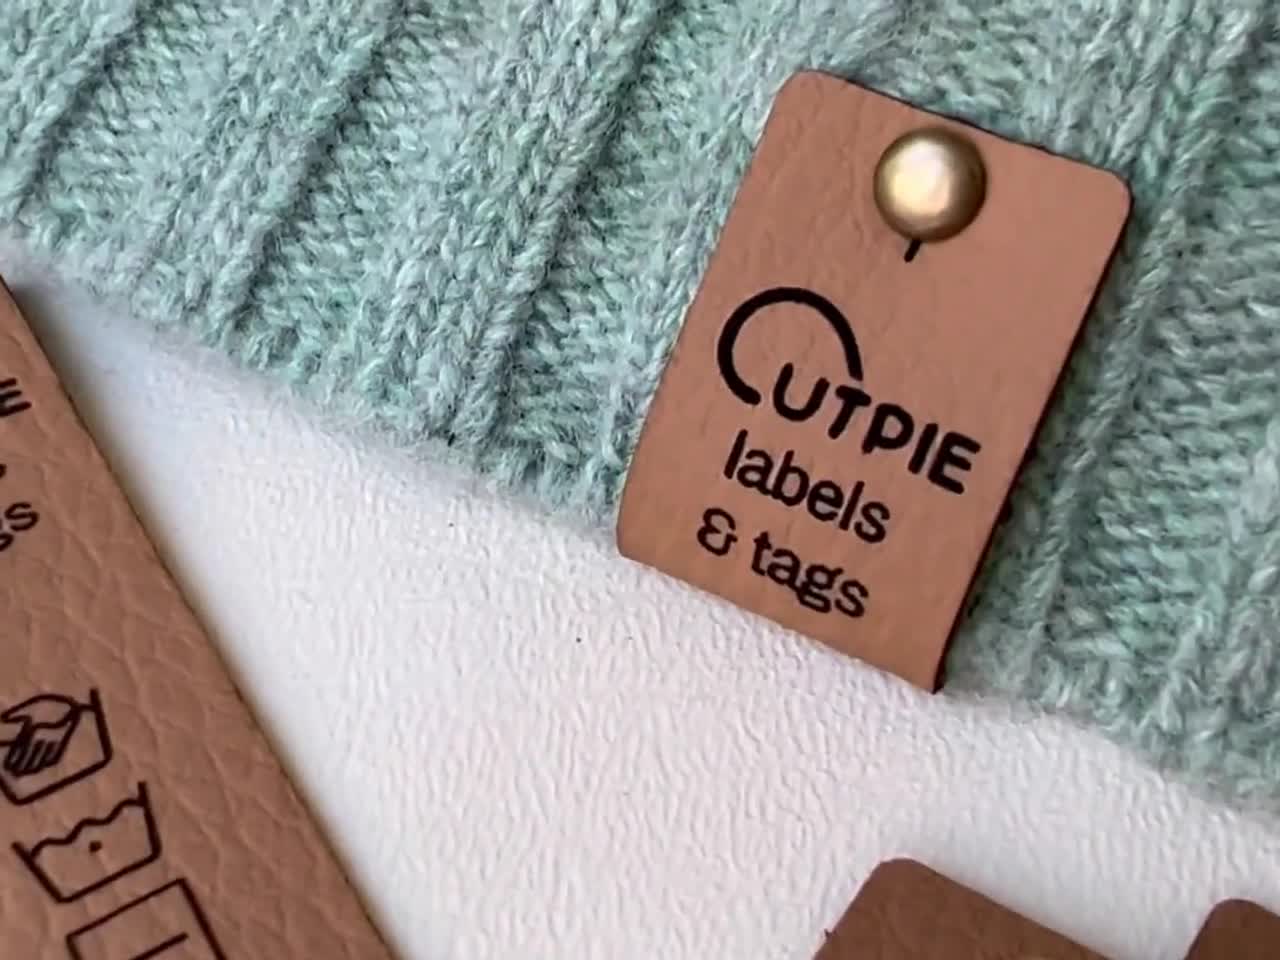 Personalized Faux Leather Tags for Knitted, Handmade or Crochet